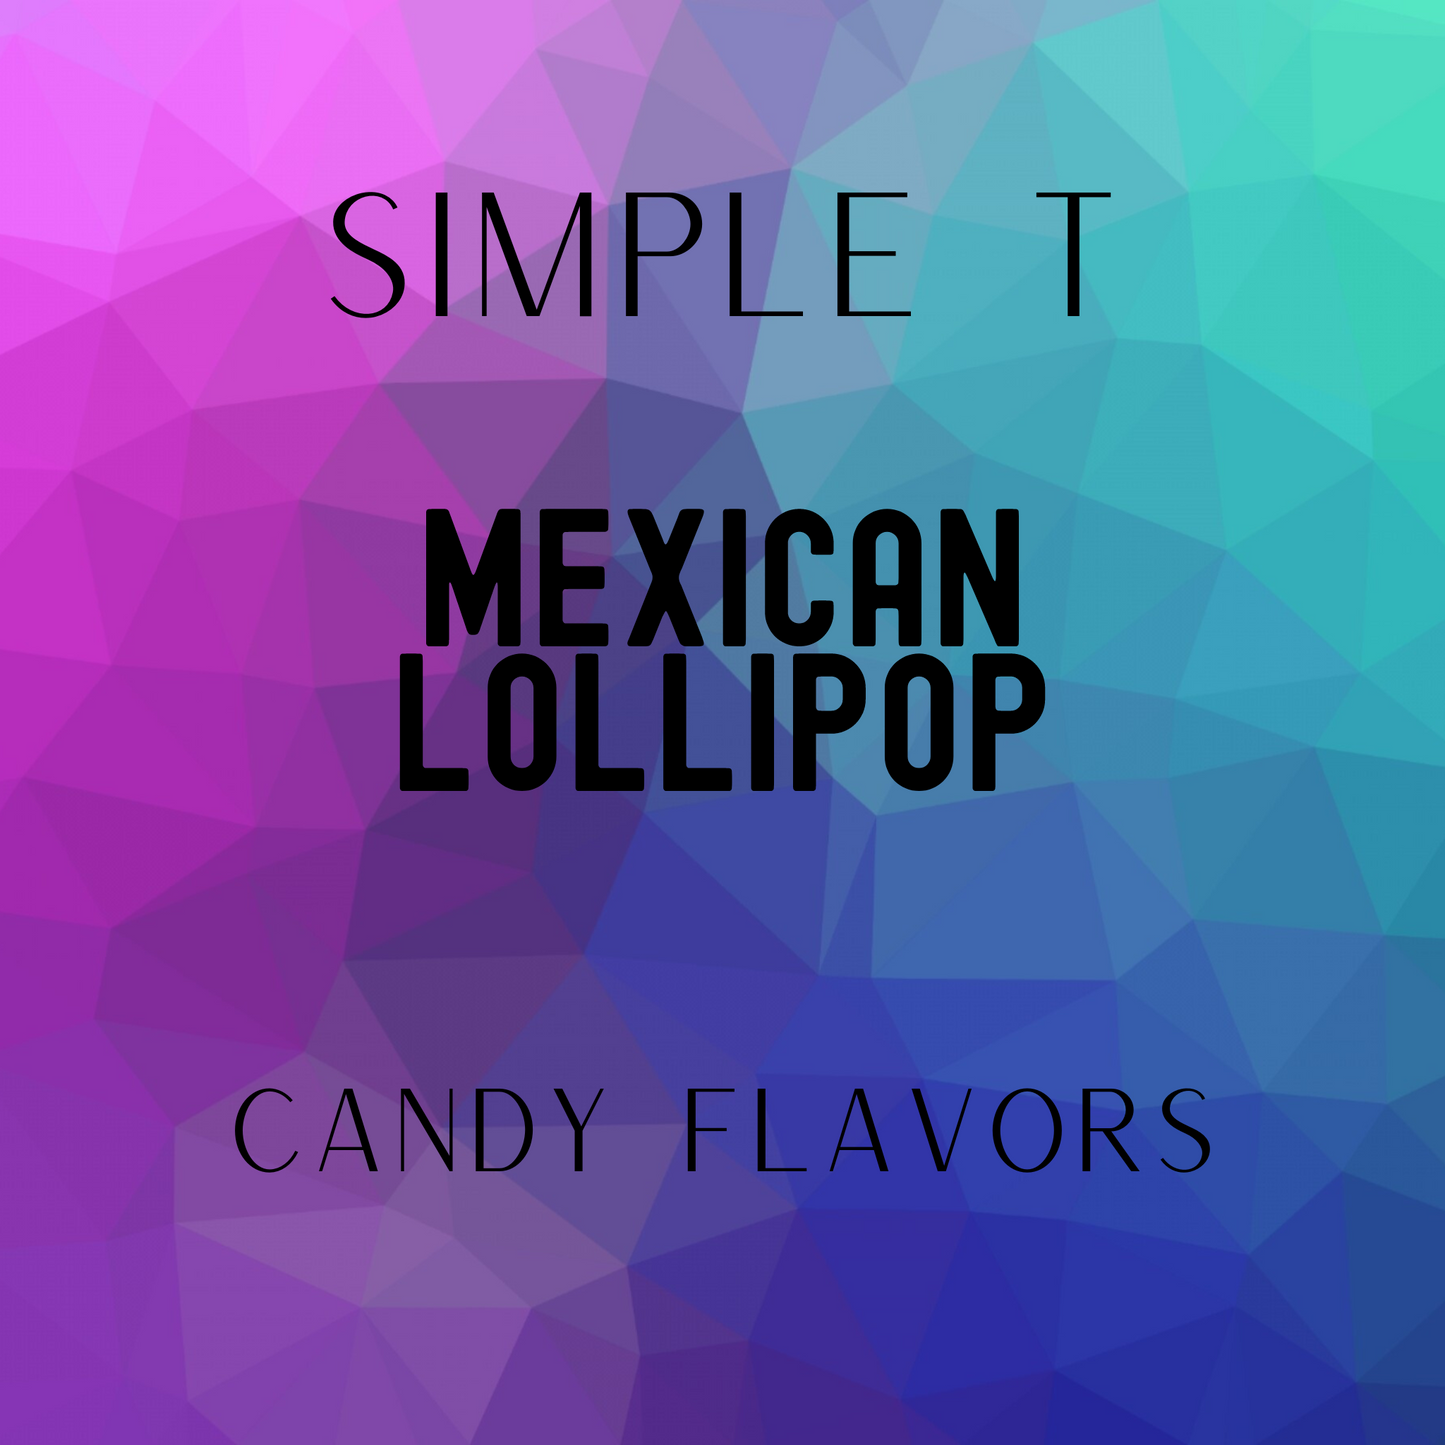 Mexican Lollipop Simply T Packets (Candy Flavors)